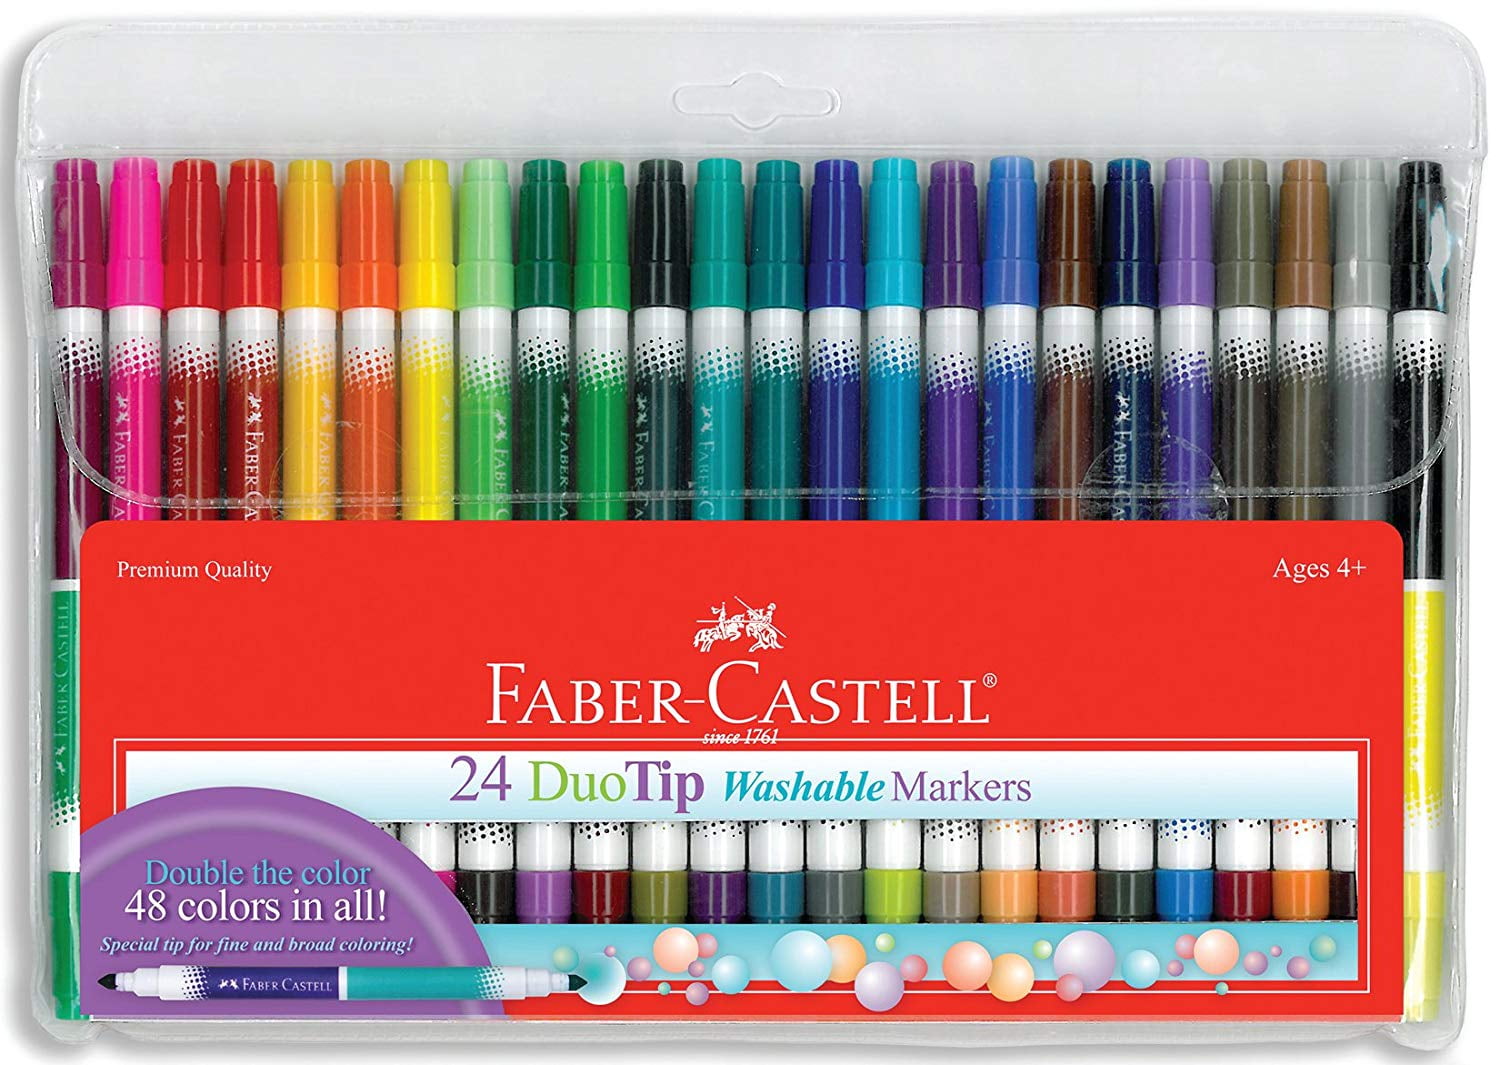 Faber Castell Duotip Washable Markers 24 Markers 48 Colors 24 Bright And Washable Markers Duotip Markers Mean Twice The Colors For By Faber Castell Walmart Com Walmart Com